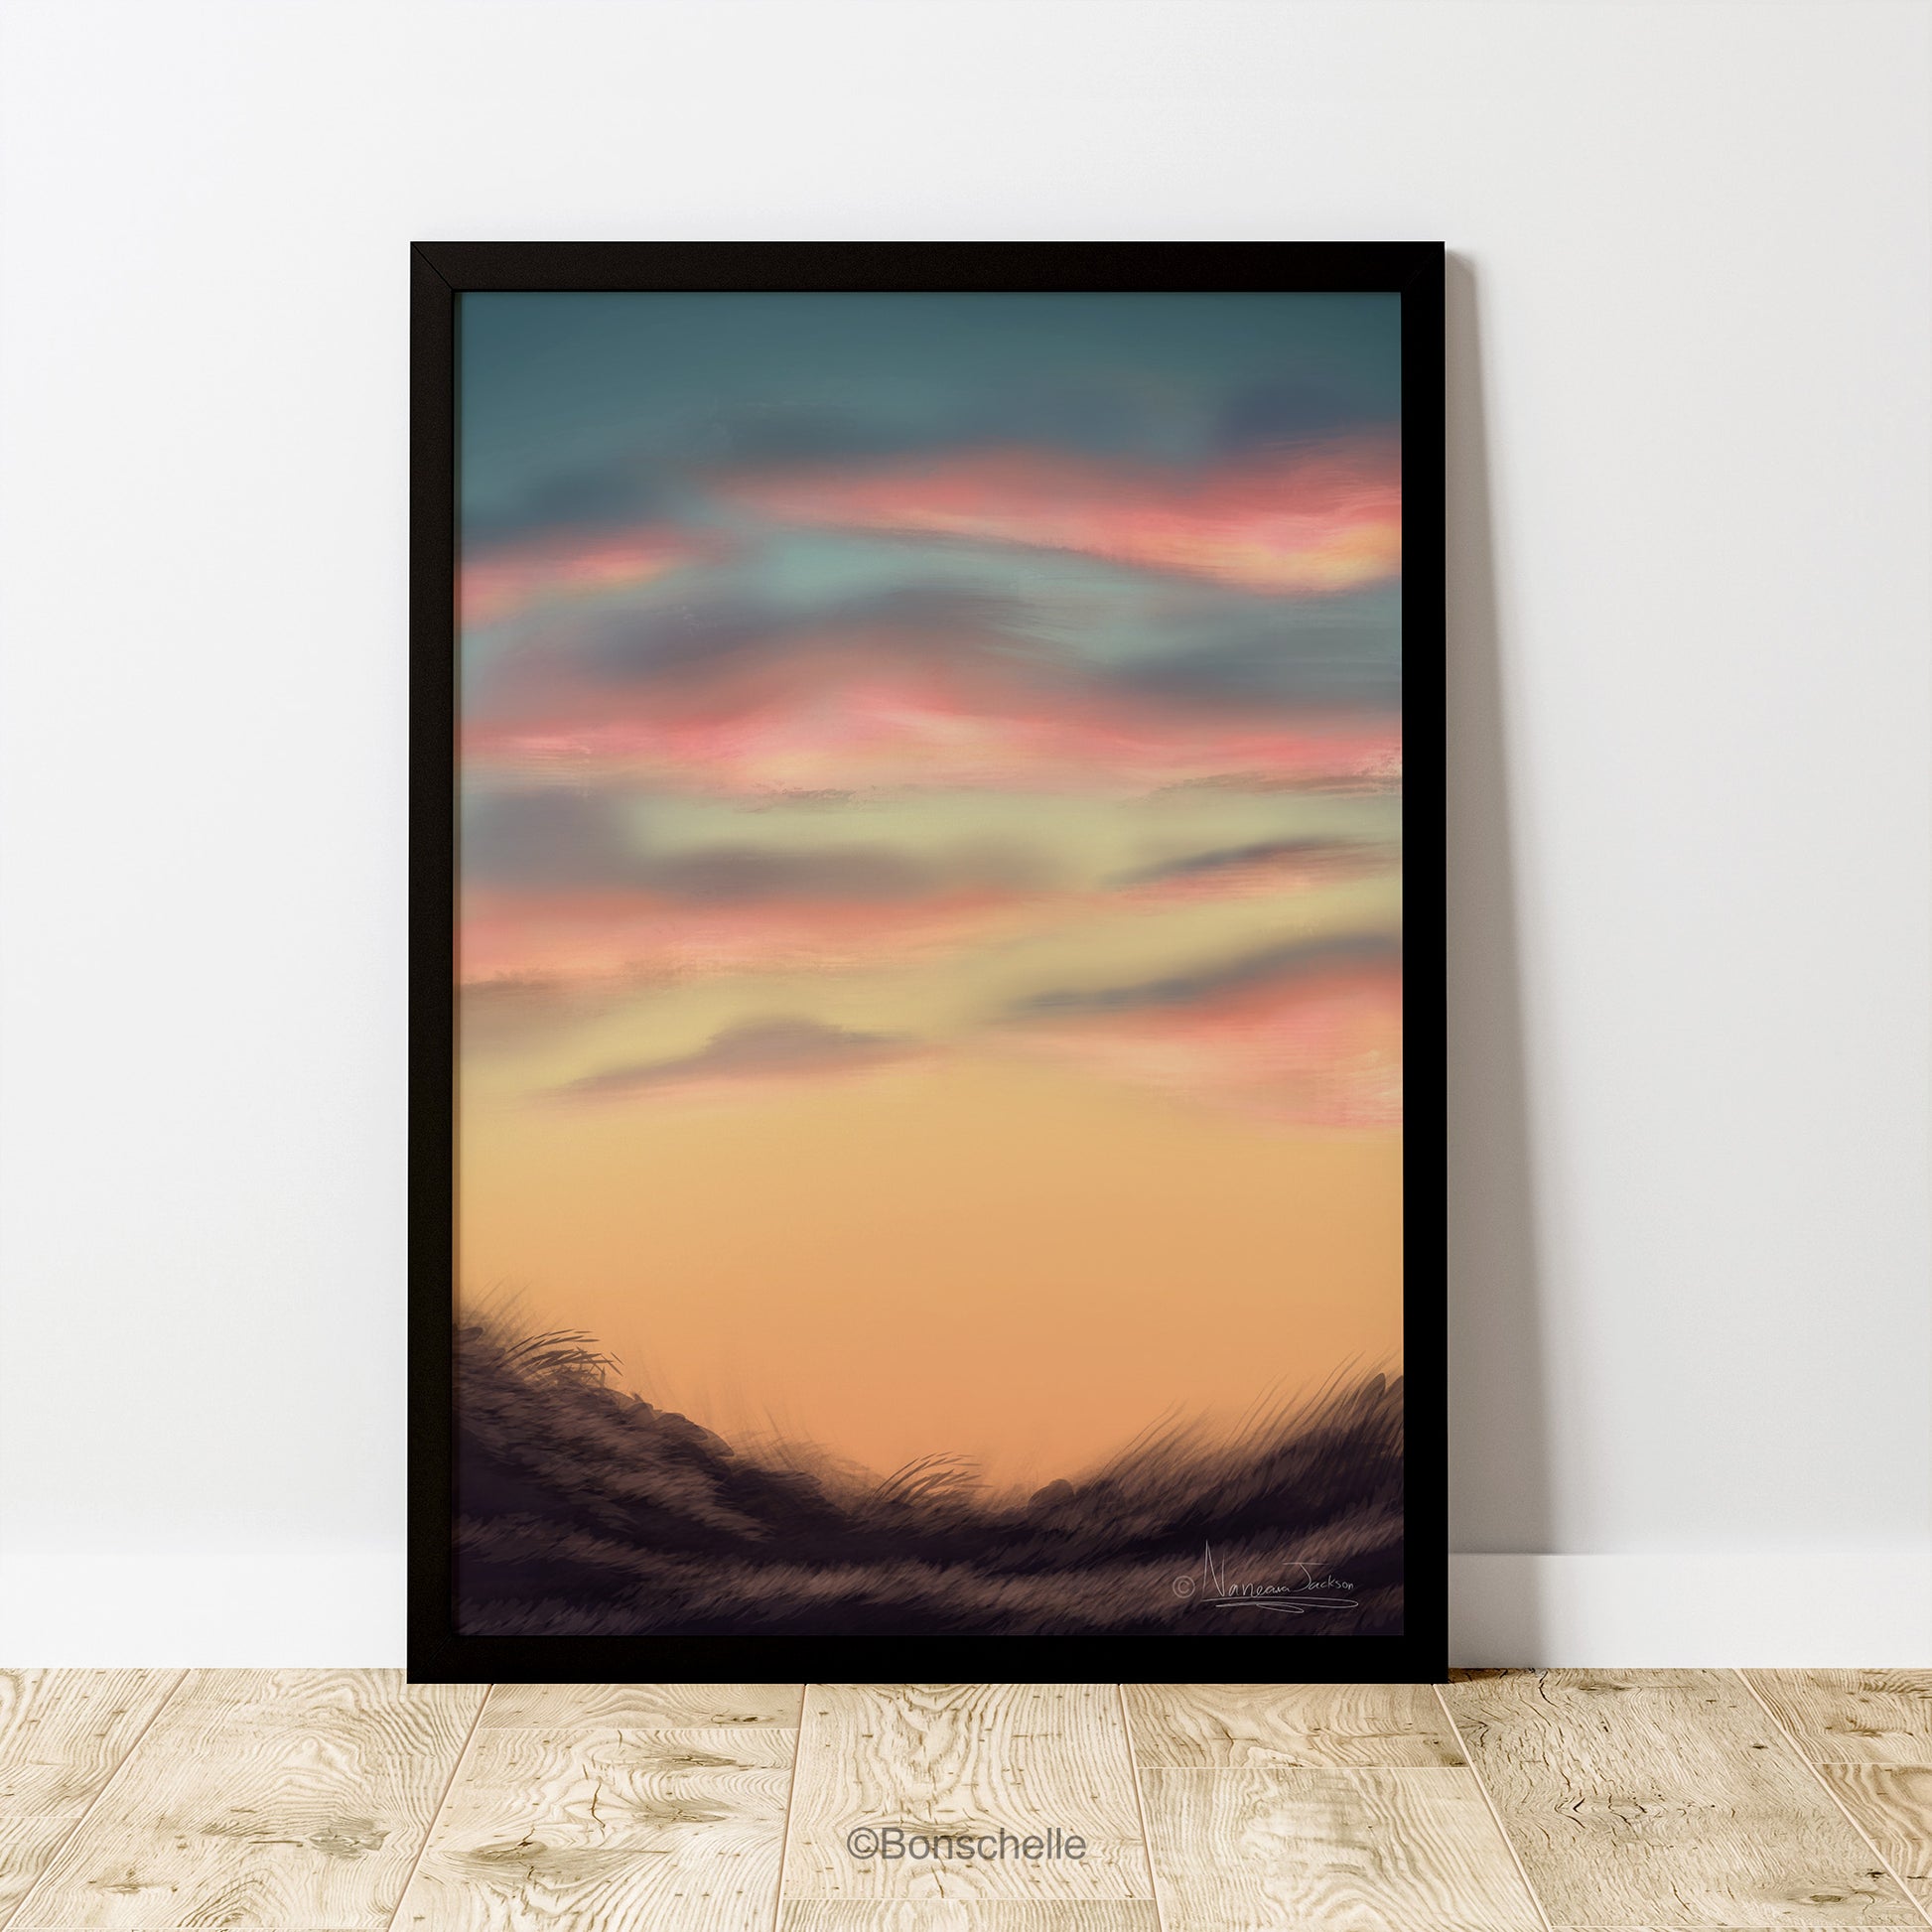 Original art poster print, 'Early Evening' in a black frame, on wooden floorboards against a white wall.